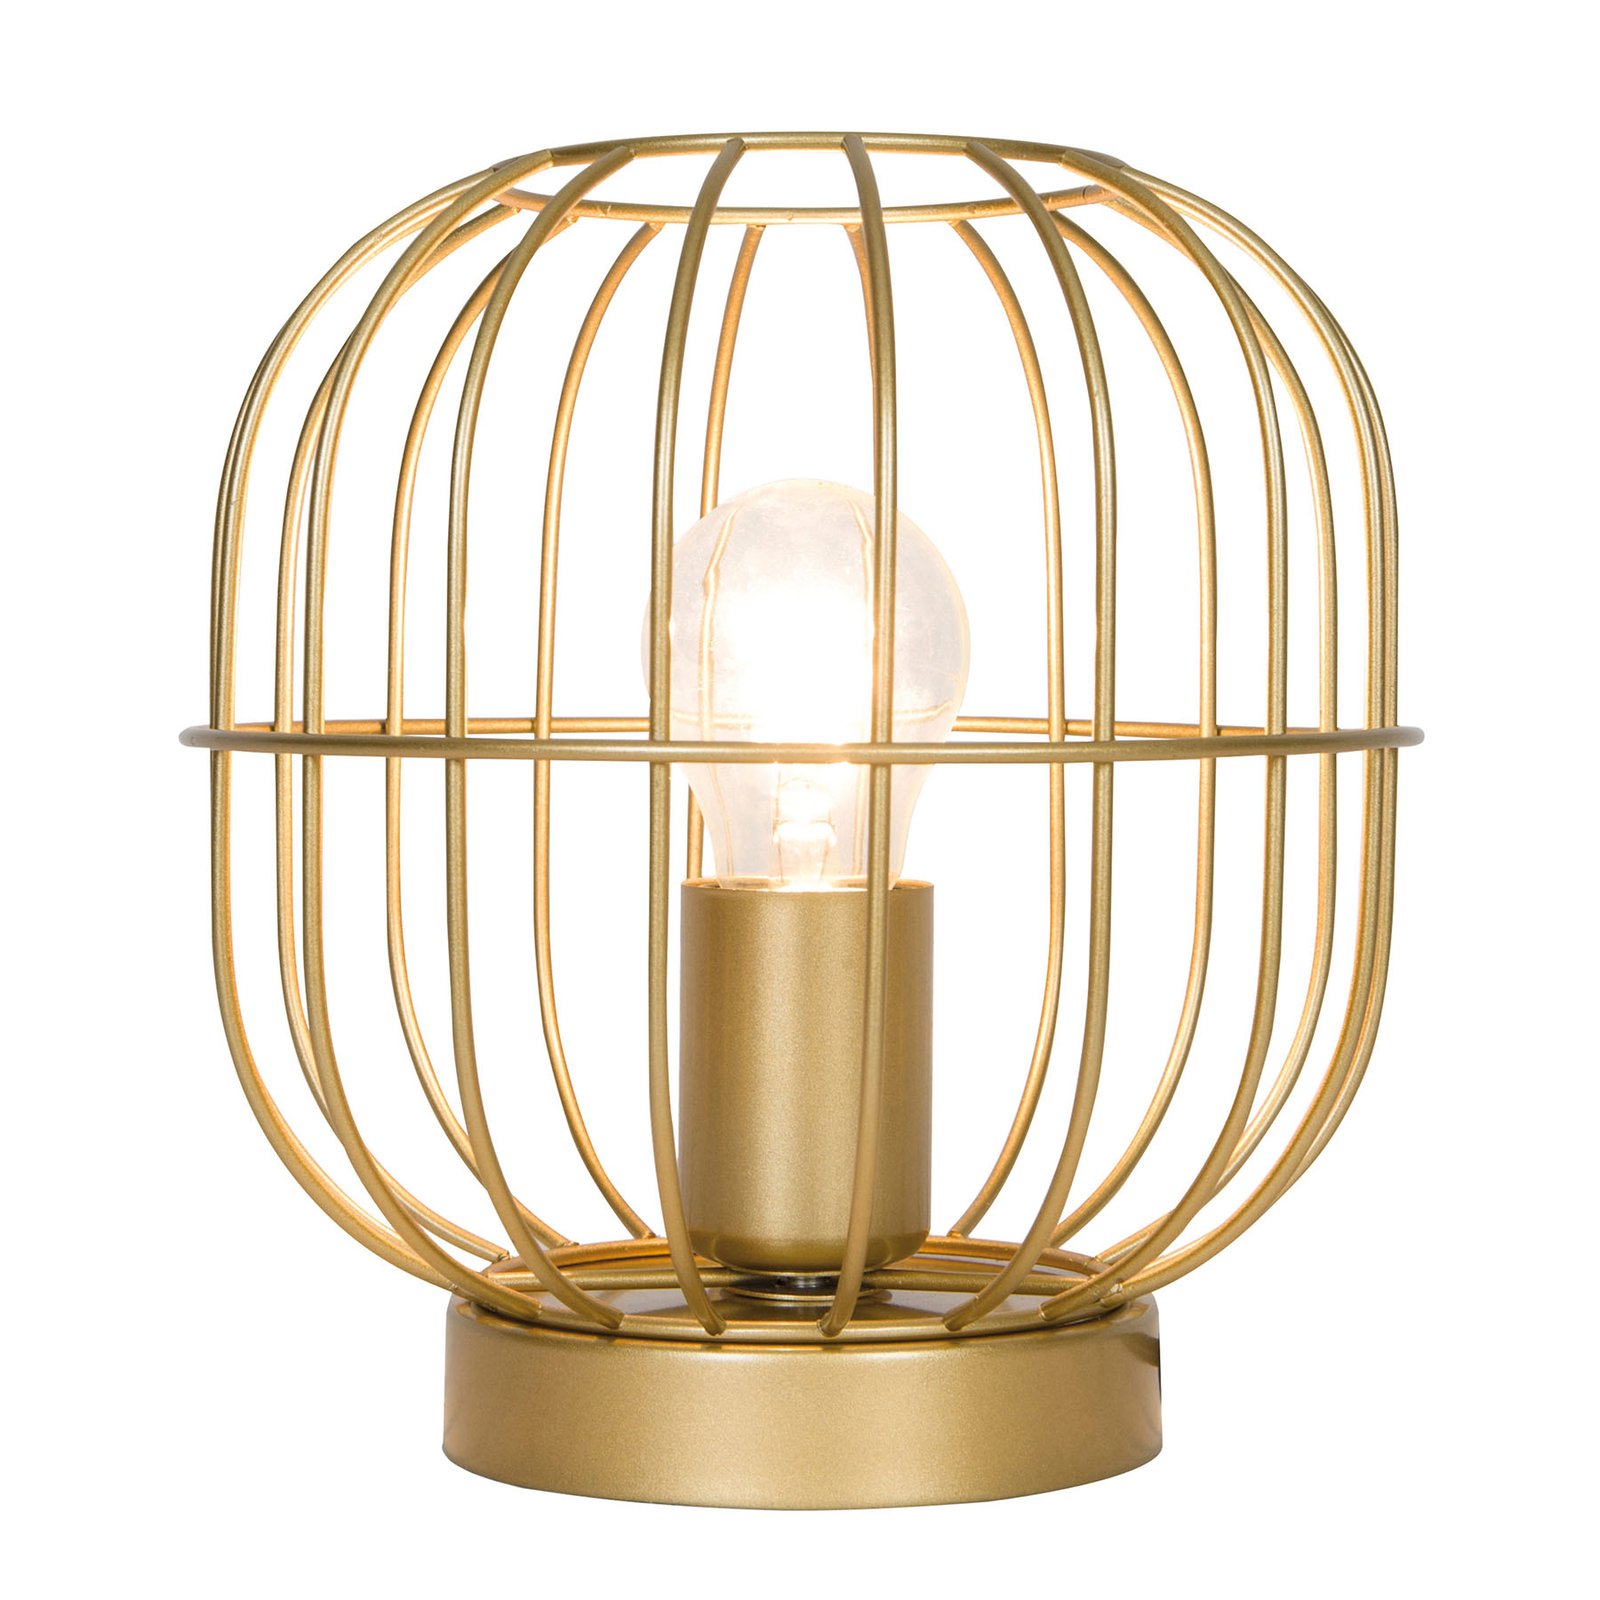 Zenith table lamp with a cage shape, gold